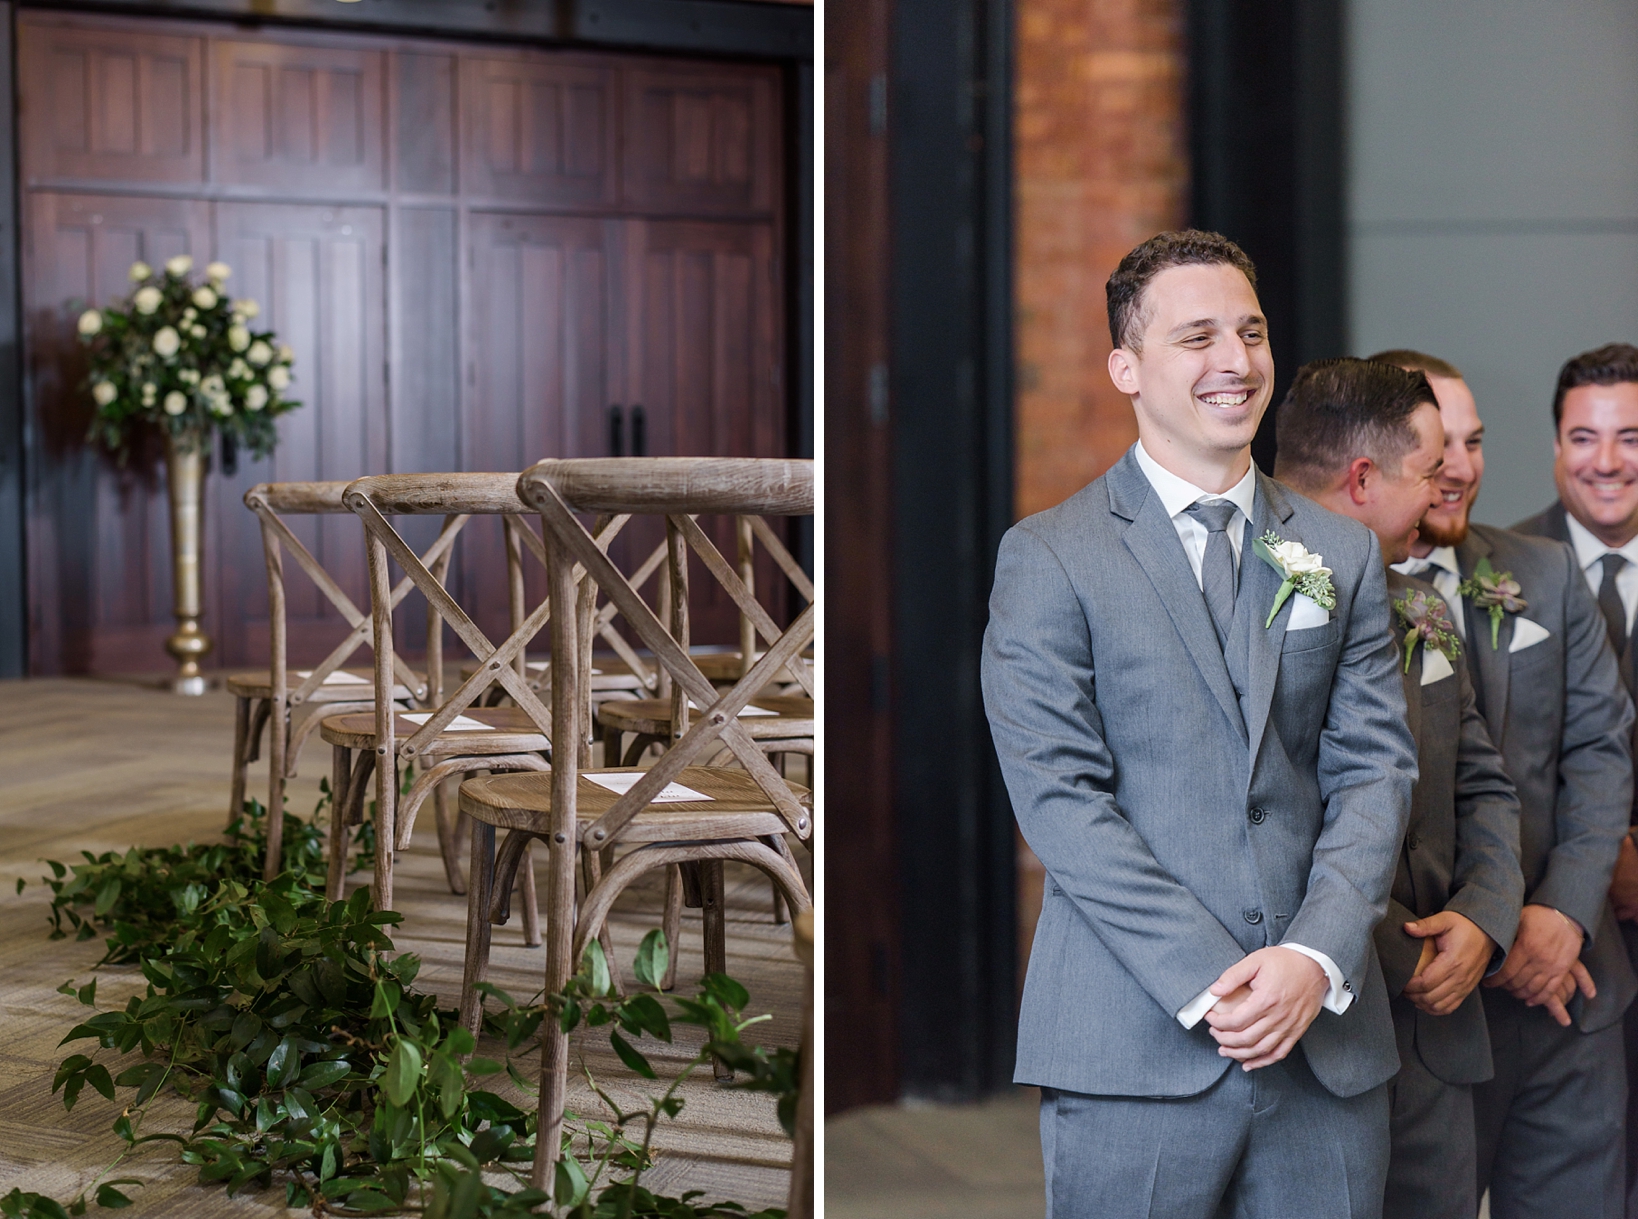 Rustic wooden chairs with greenery aisle runner and groom seeing his bride walk down the aisle